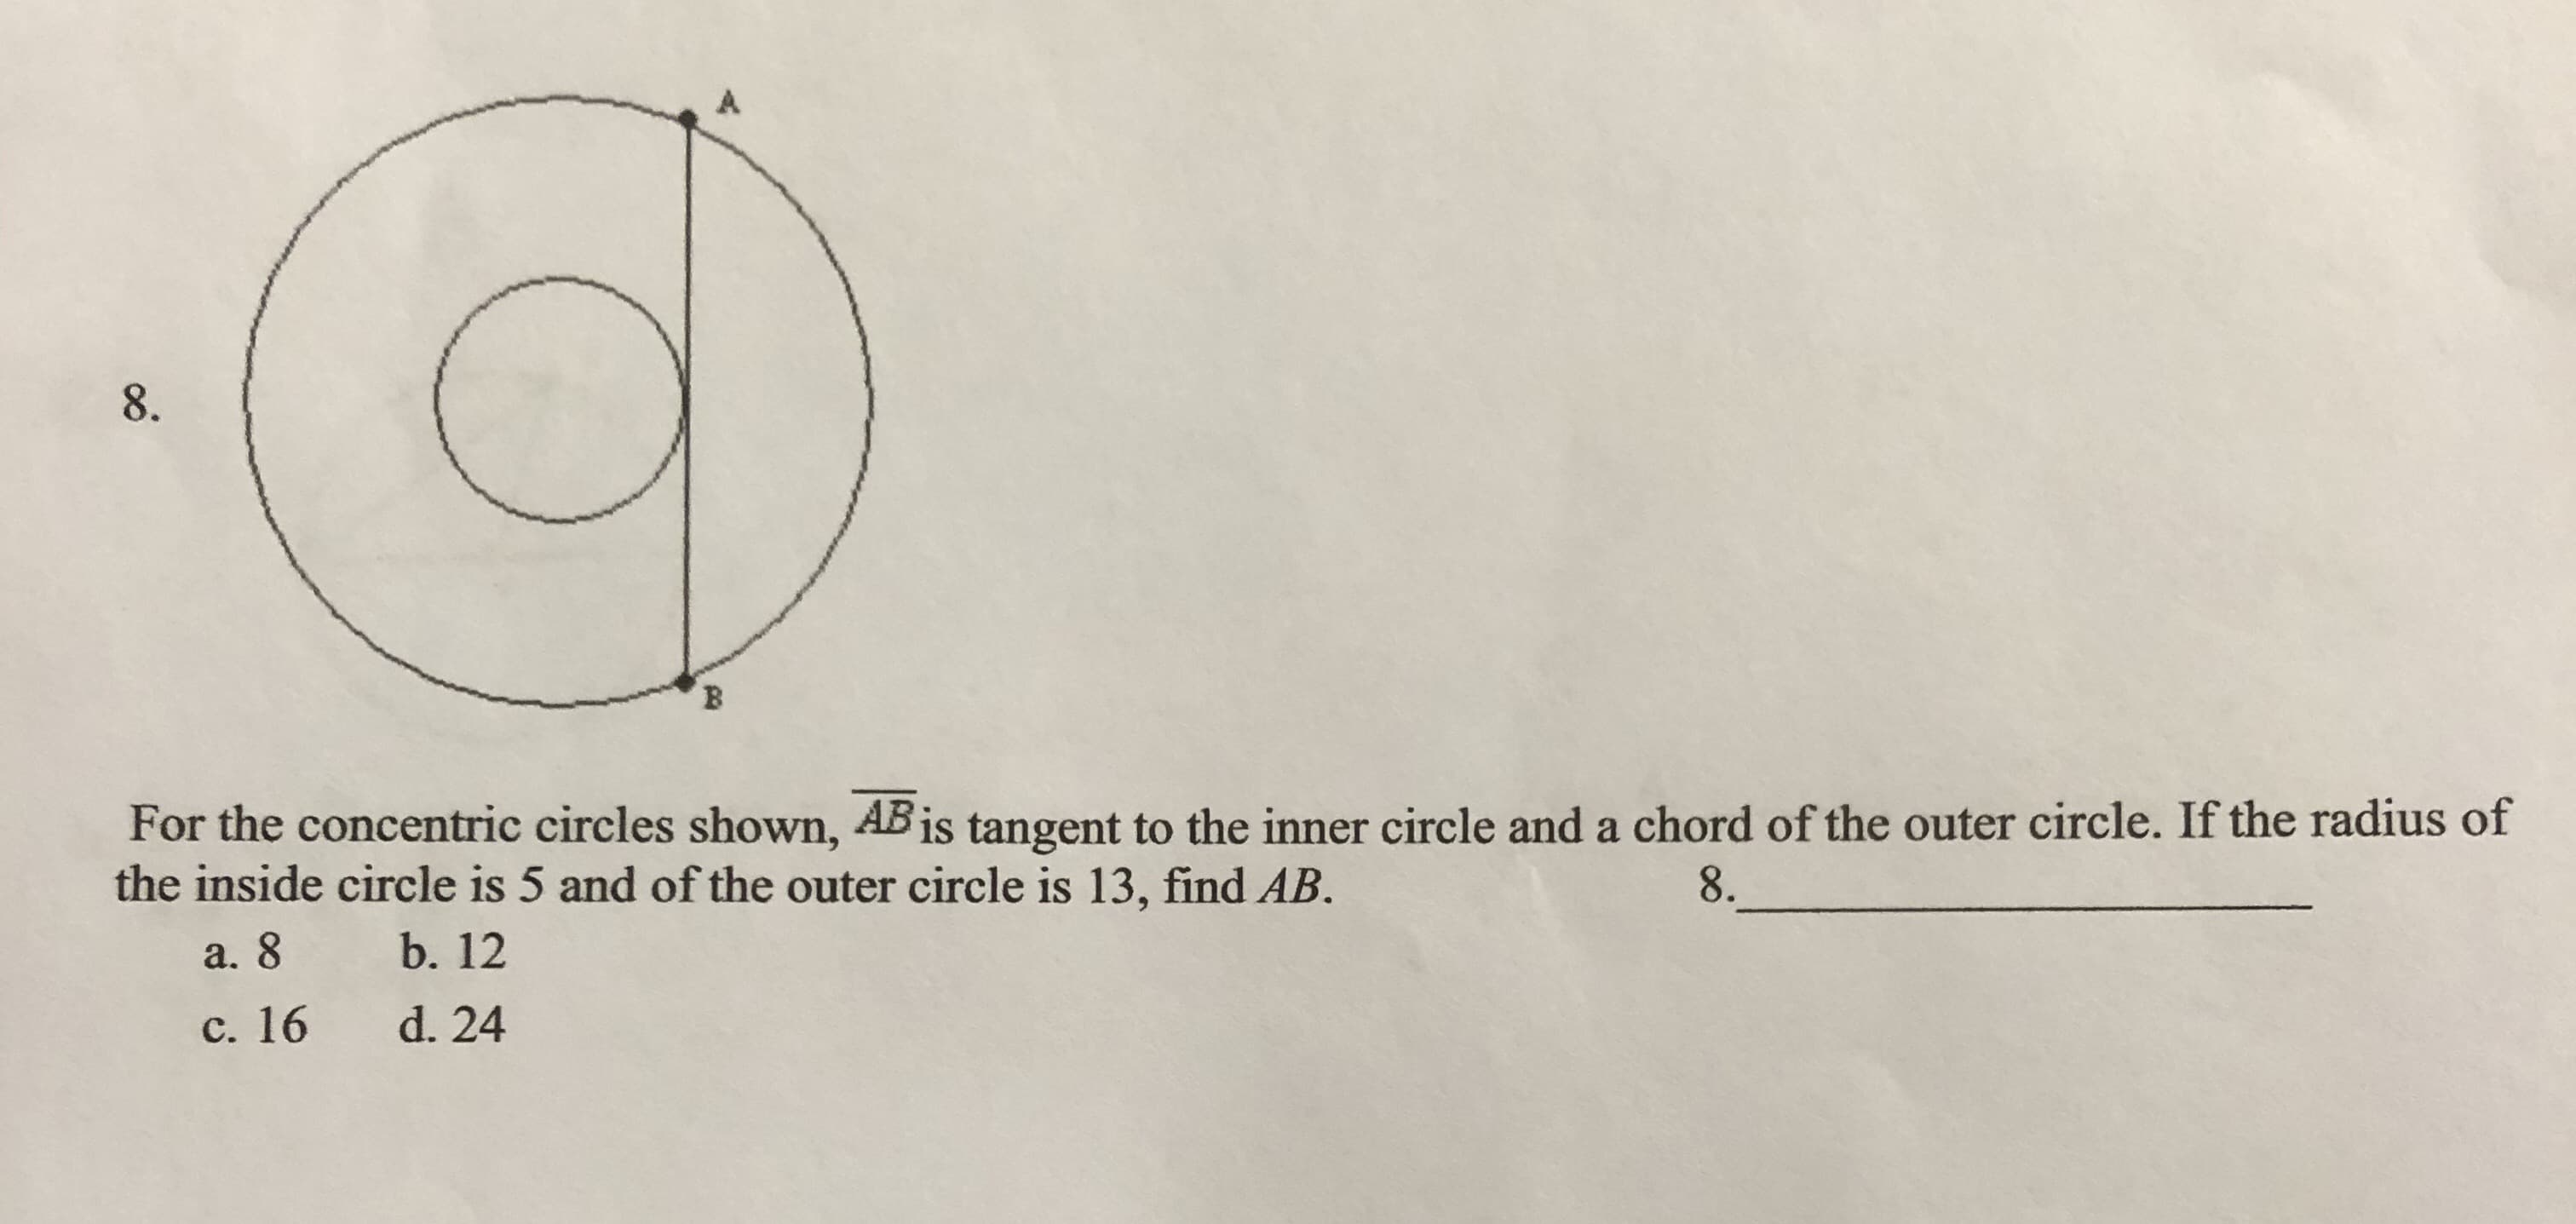 A
8
For the concentric circles shown, ABis tangent to the inner circle and a chord of the outer circle. If the radius of
the inside circle is 5 and of the outer circle is 13, find AB.
8.
b. 12
а. 8
d. 24
с. 16
